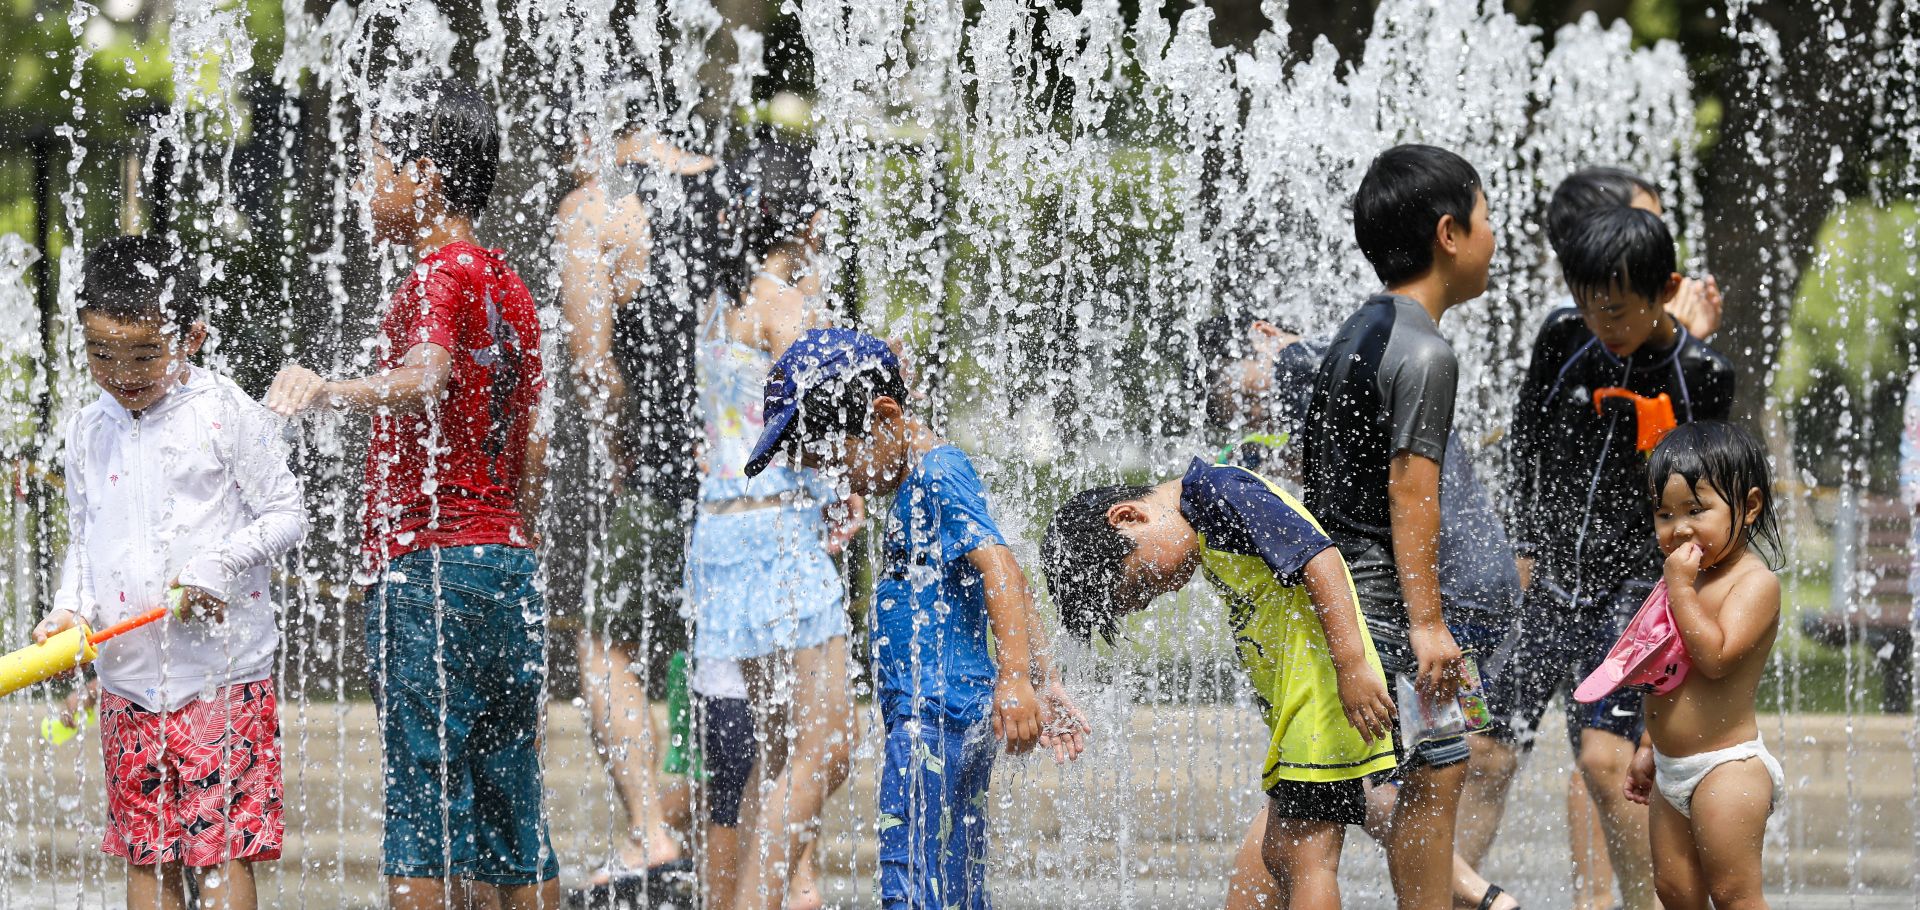 epa06905869 Children play in the water jets at a park near Nerima in Tokyo, Japan, 23 July 2018 as temperature rose up to 39.6 degrees Celsius, the highest temperature since the start of weather information record. While central Tokyo hit the 39 degrees mark, the city of Kumagaya, north of Tokyo measured 41.1 degrees Celsius , the yet highest temperature in Japan. From the end of April to mid-July 2018, reportedly so far 21,166 people were taken to hospital for heat related problems, alone from 09 to 15 July, a total of 9,956 people were hospitalized due to suffering from the hot weather conditions, Japan's Fire and Disaster Management Agency said.  EPA/KIMIMASA MAYAMA